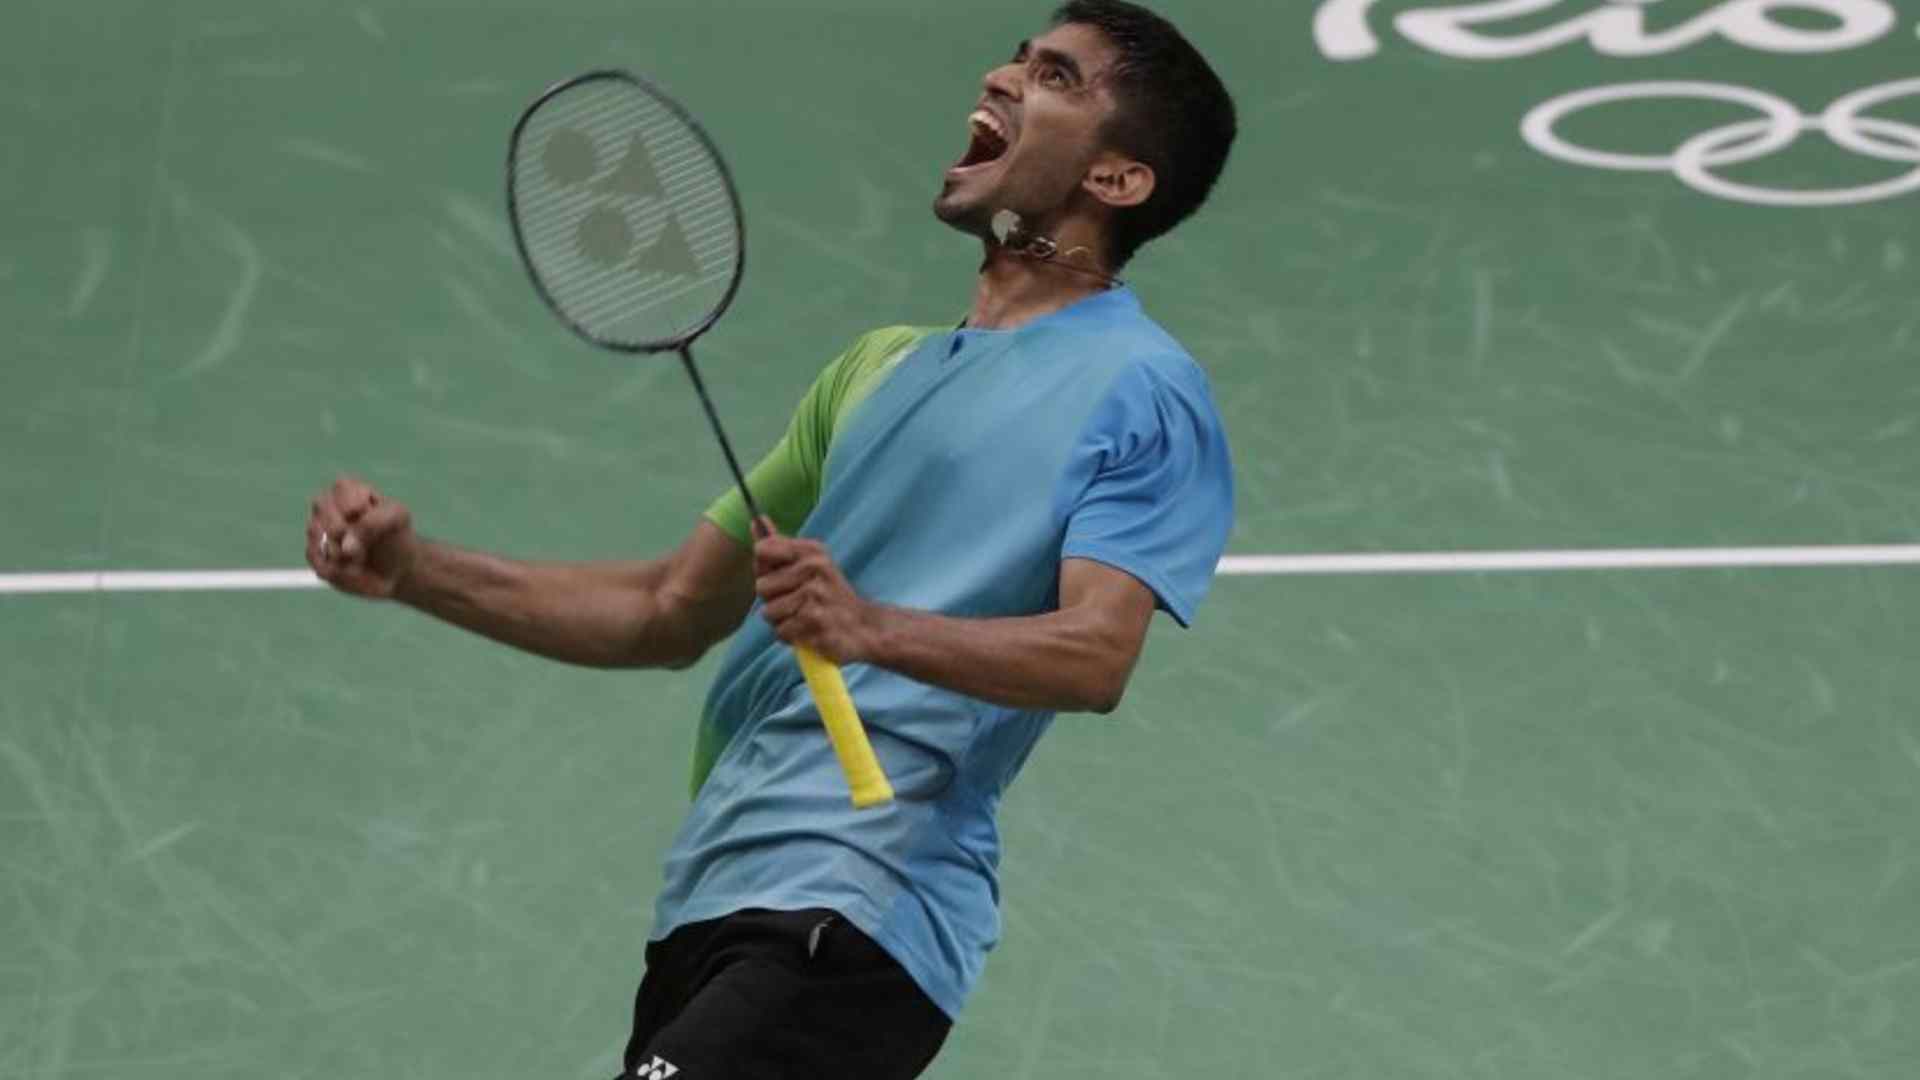 Kidambi Srikanth celebrating after win at the Rio Olympics 2016 (Image Credit: Twitter)